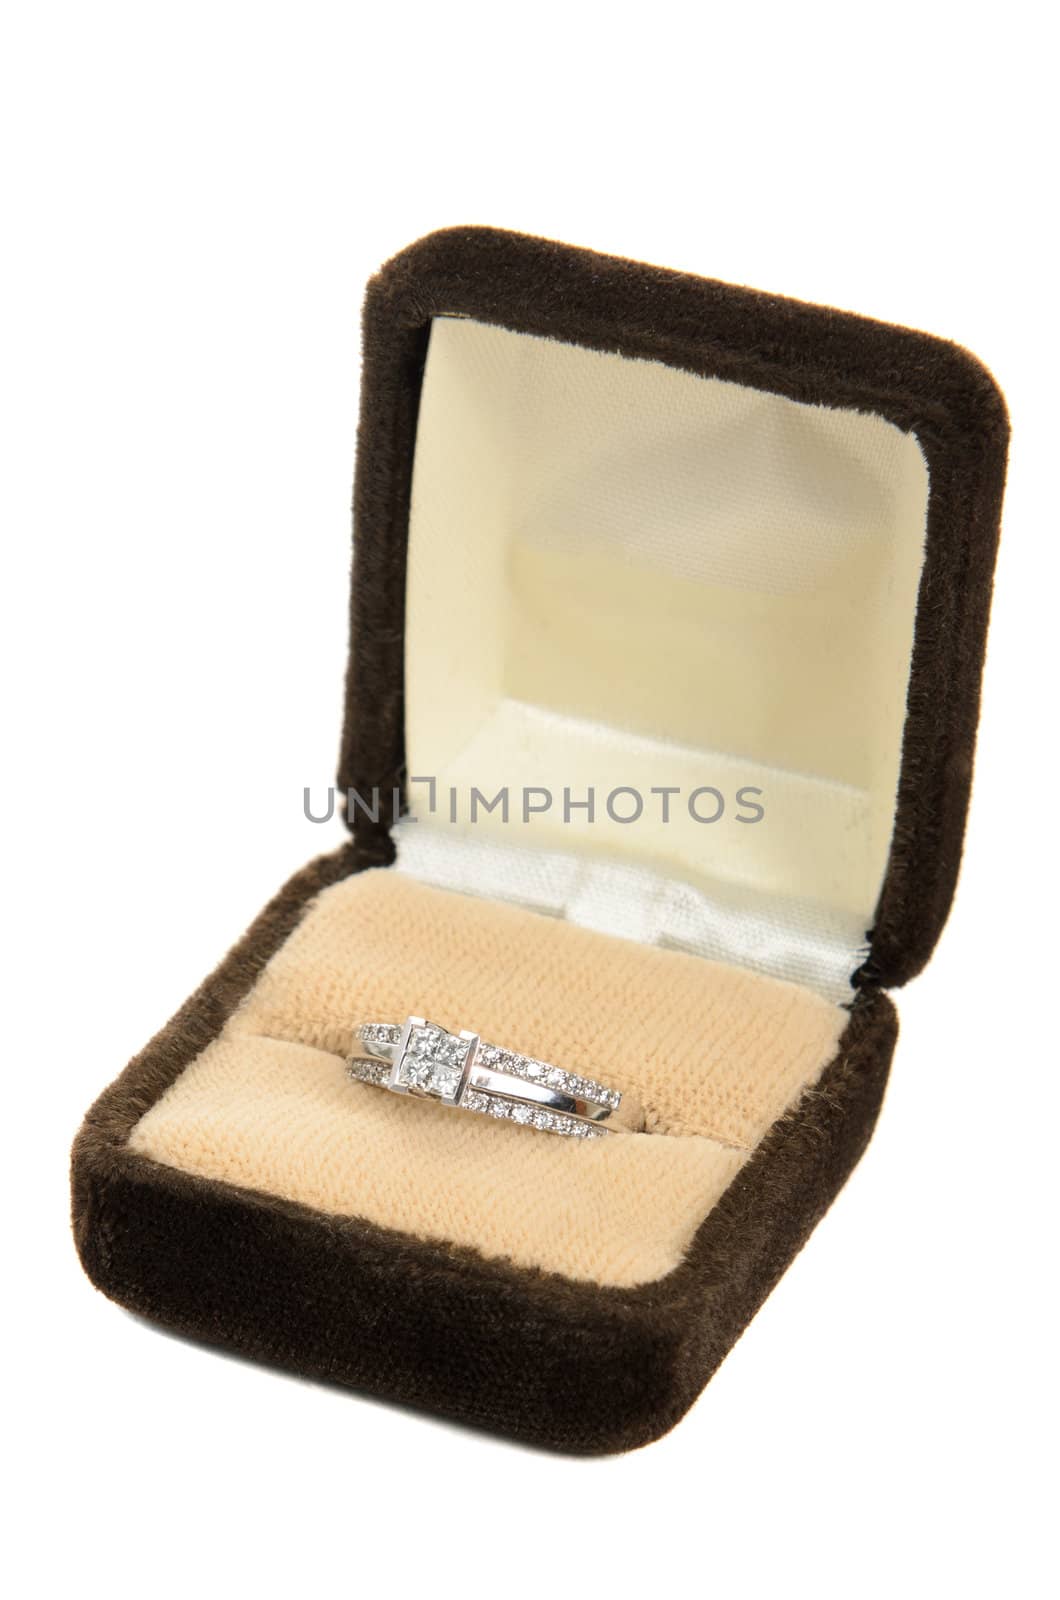 A diamond ring in a box, isolated against a white background